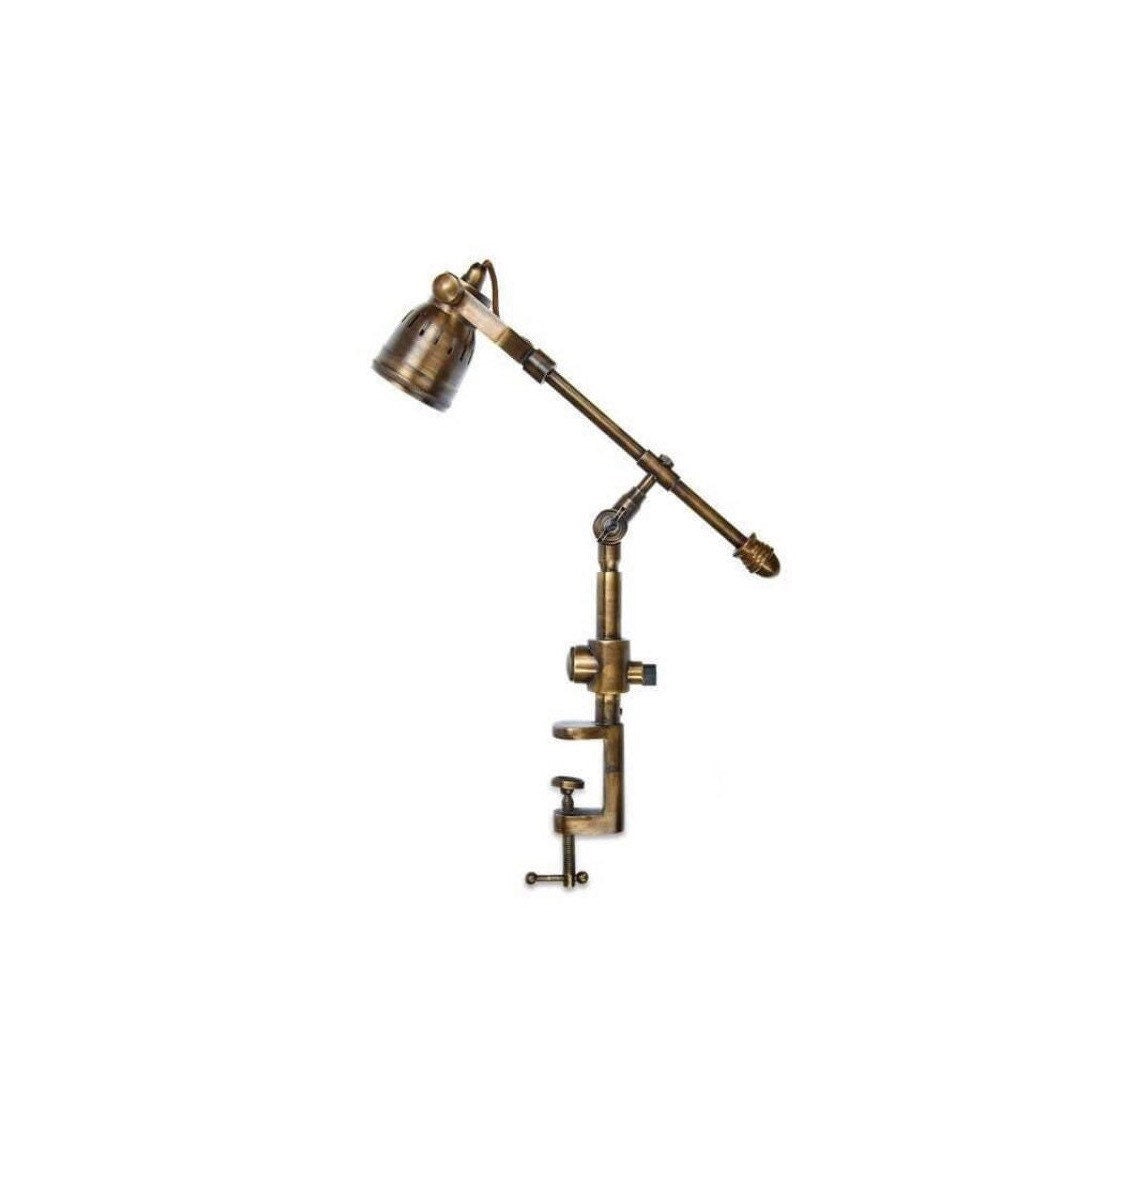 Maxlume ~ Solid Brass Table Clamp Lamp Vintage Style | Fabric Cable | Bedroom | Bedside Reading Light | Retro |